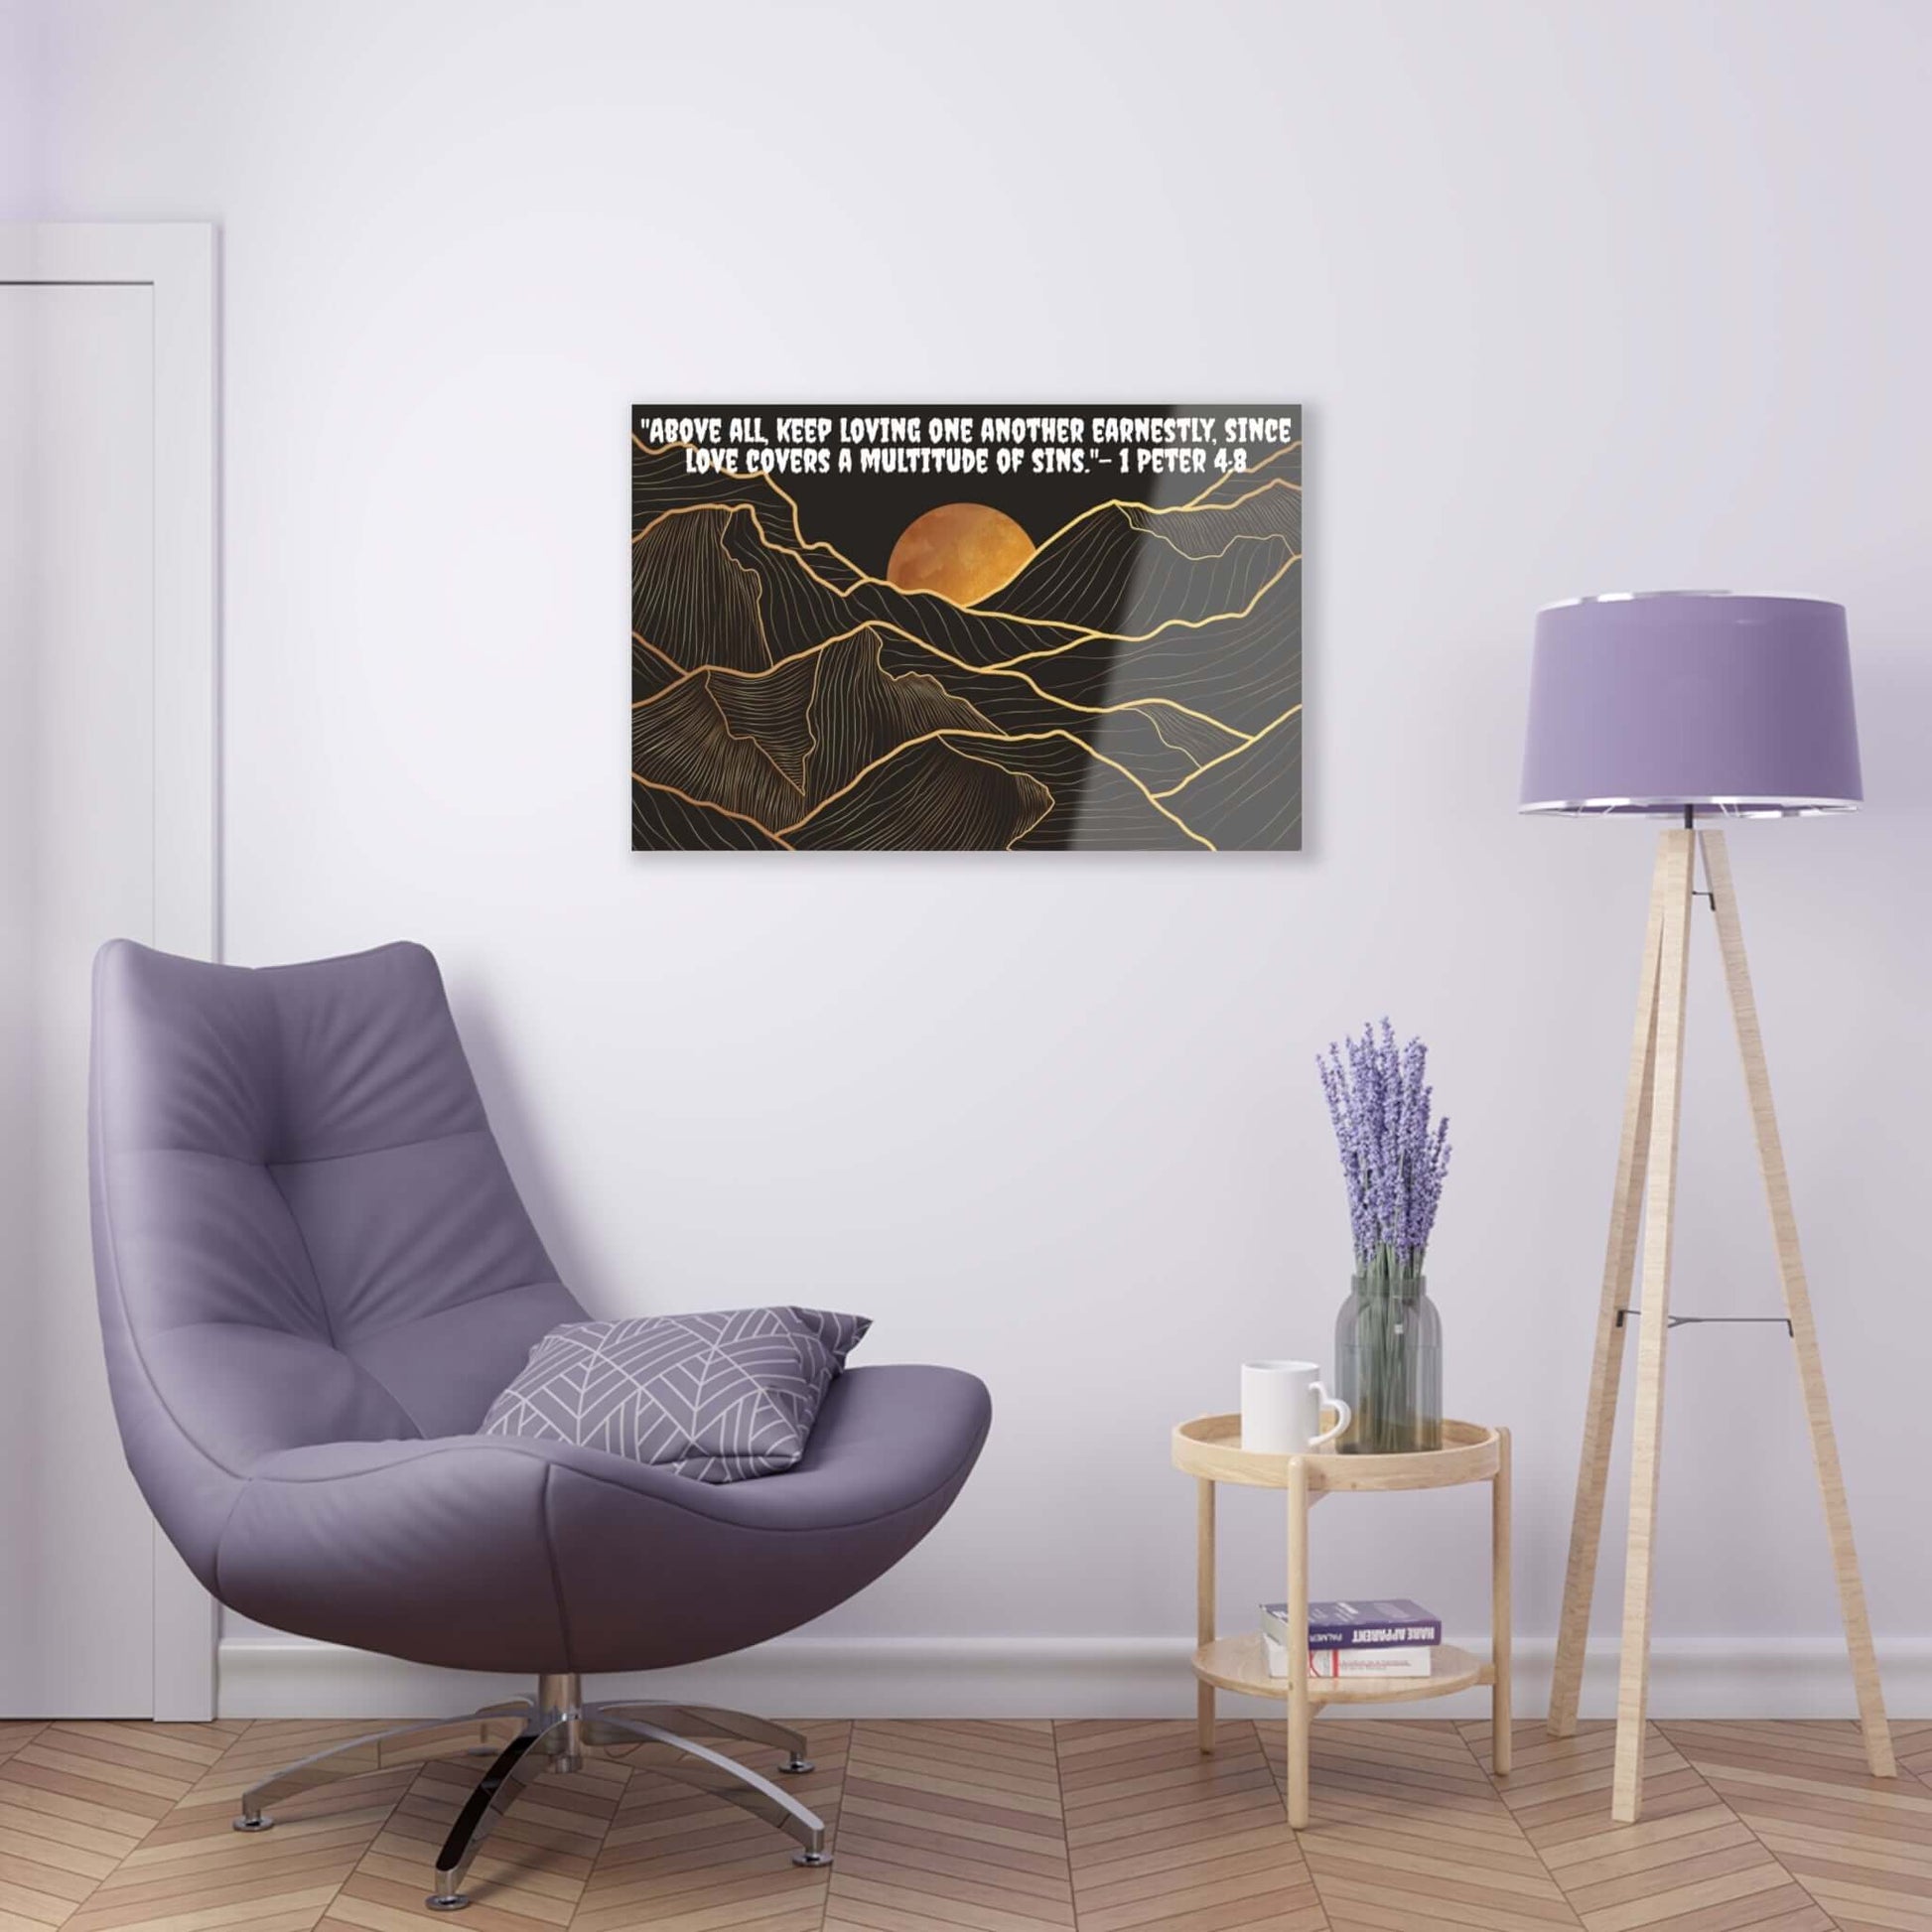 Abstract Black Wall Art - Acrylic Print with 1 Peter 4:8 | Art & Wall Decor,Assembled in the USA,Assembled in USA,Decor,Home & Living,Home Decor,Indoor,Made in the USA,Made in USA,Poster